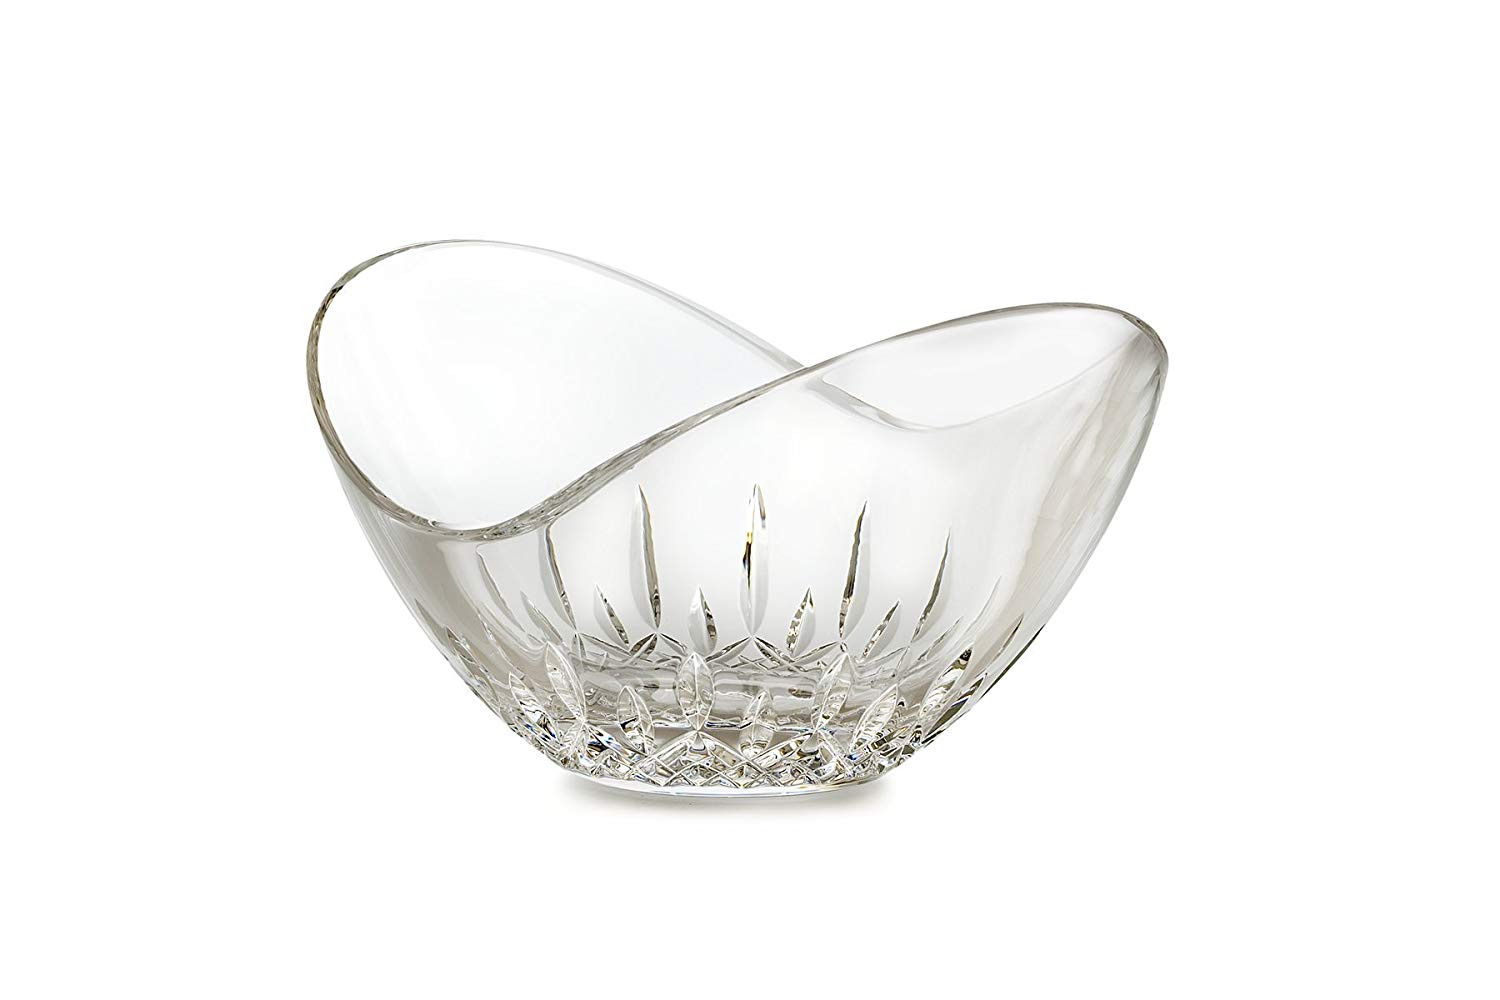 10 Fabulous Waterford Lismore Vase 8 2024 free download waterford lismore vase 8 of amazon com waterford crystal lismore essence ellipse 6 inch bowl with amazon com waterford crystal lismore essence ellipse 6 inch bowl decorative bowls kitchen di